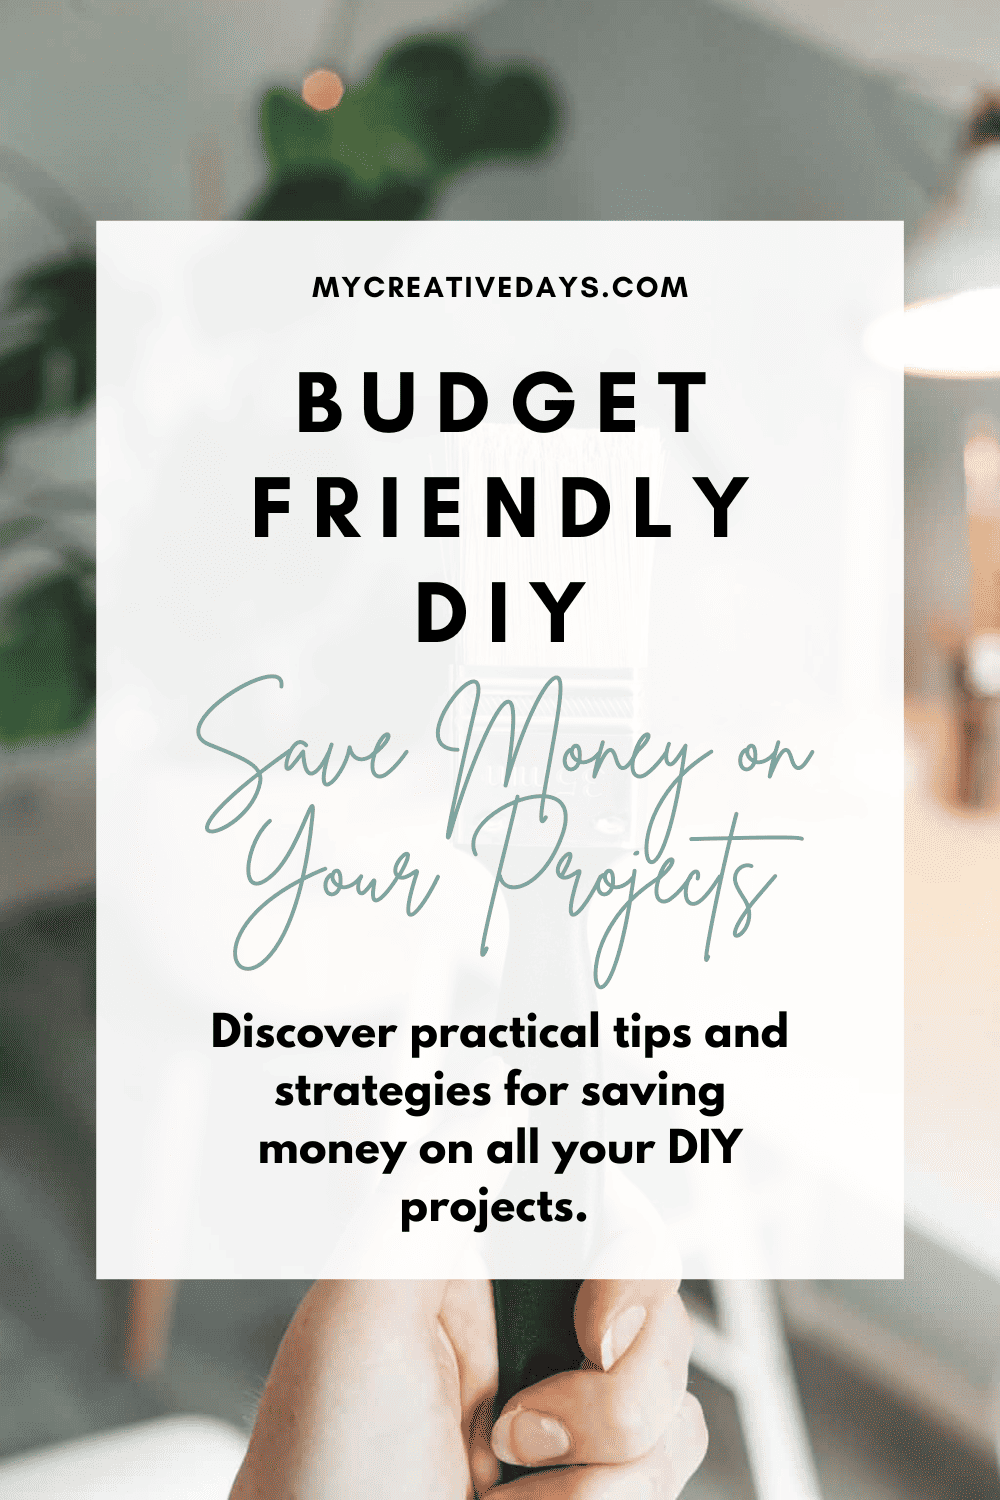 Budget Friendly DIY. Practical tips to save money on your DIY projects. From smart material shopping to repurposing household items.